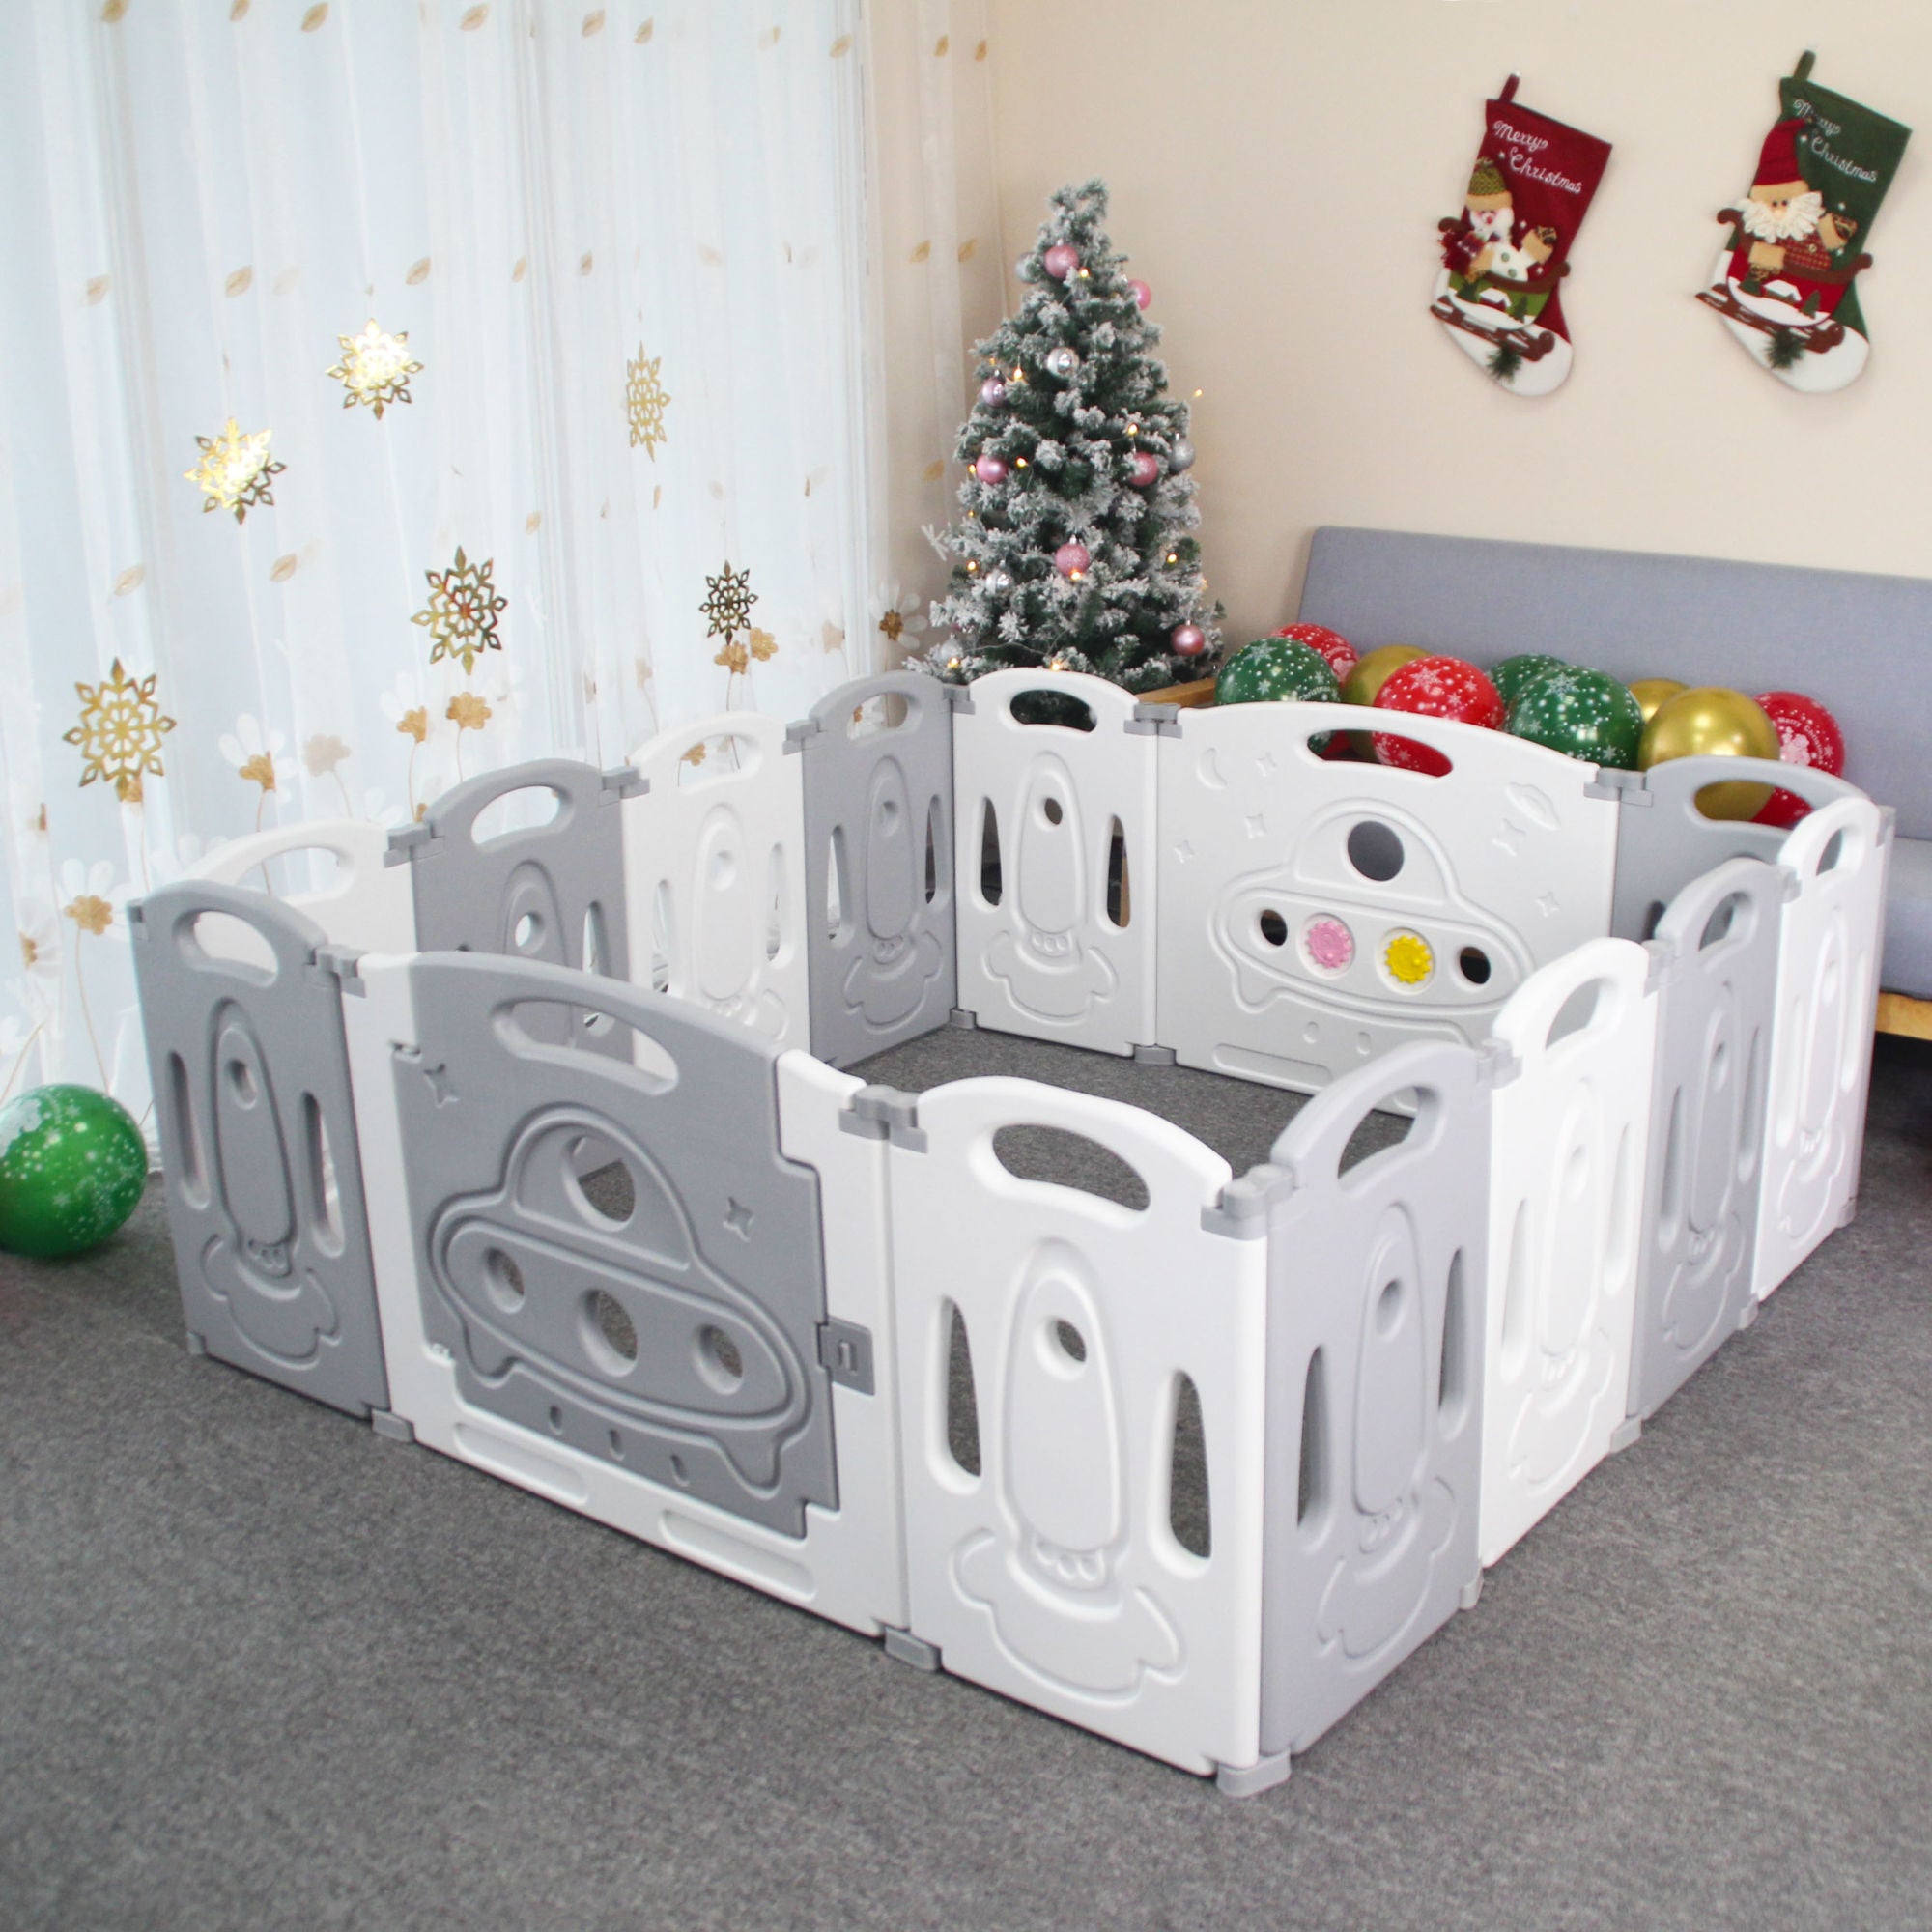 Foldable Baby playpen Baby Folding Play Pen Kids Activity Centre Safety Play Yard Home Indoor Outdoor New Pen